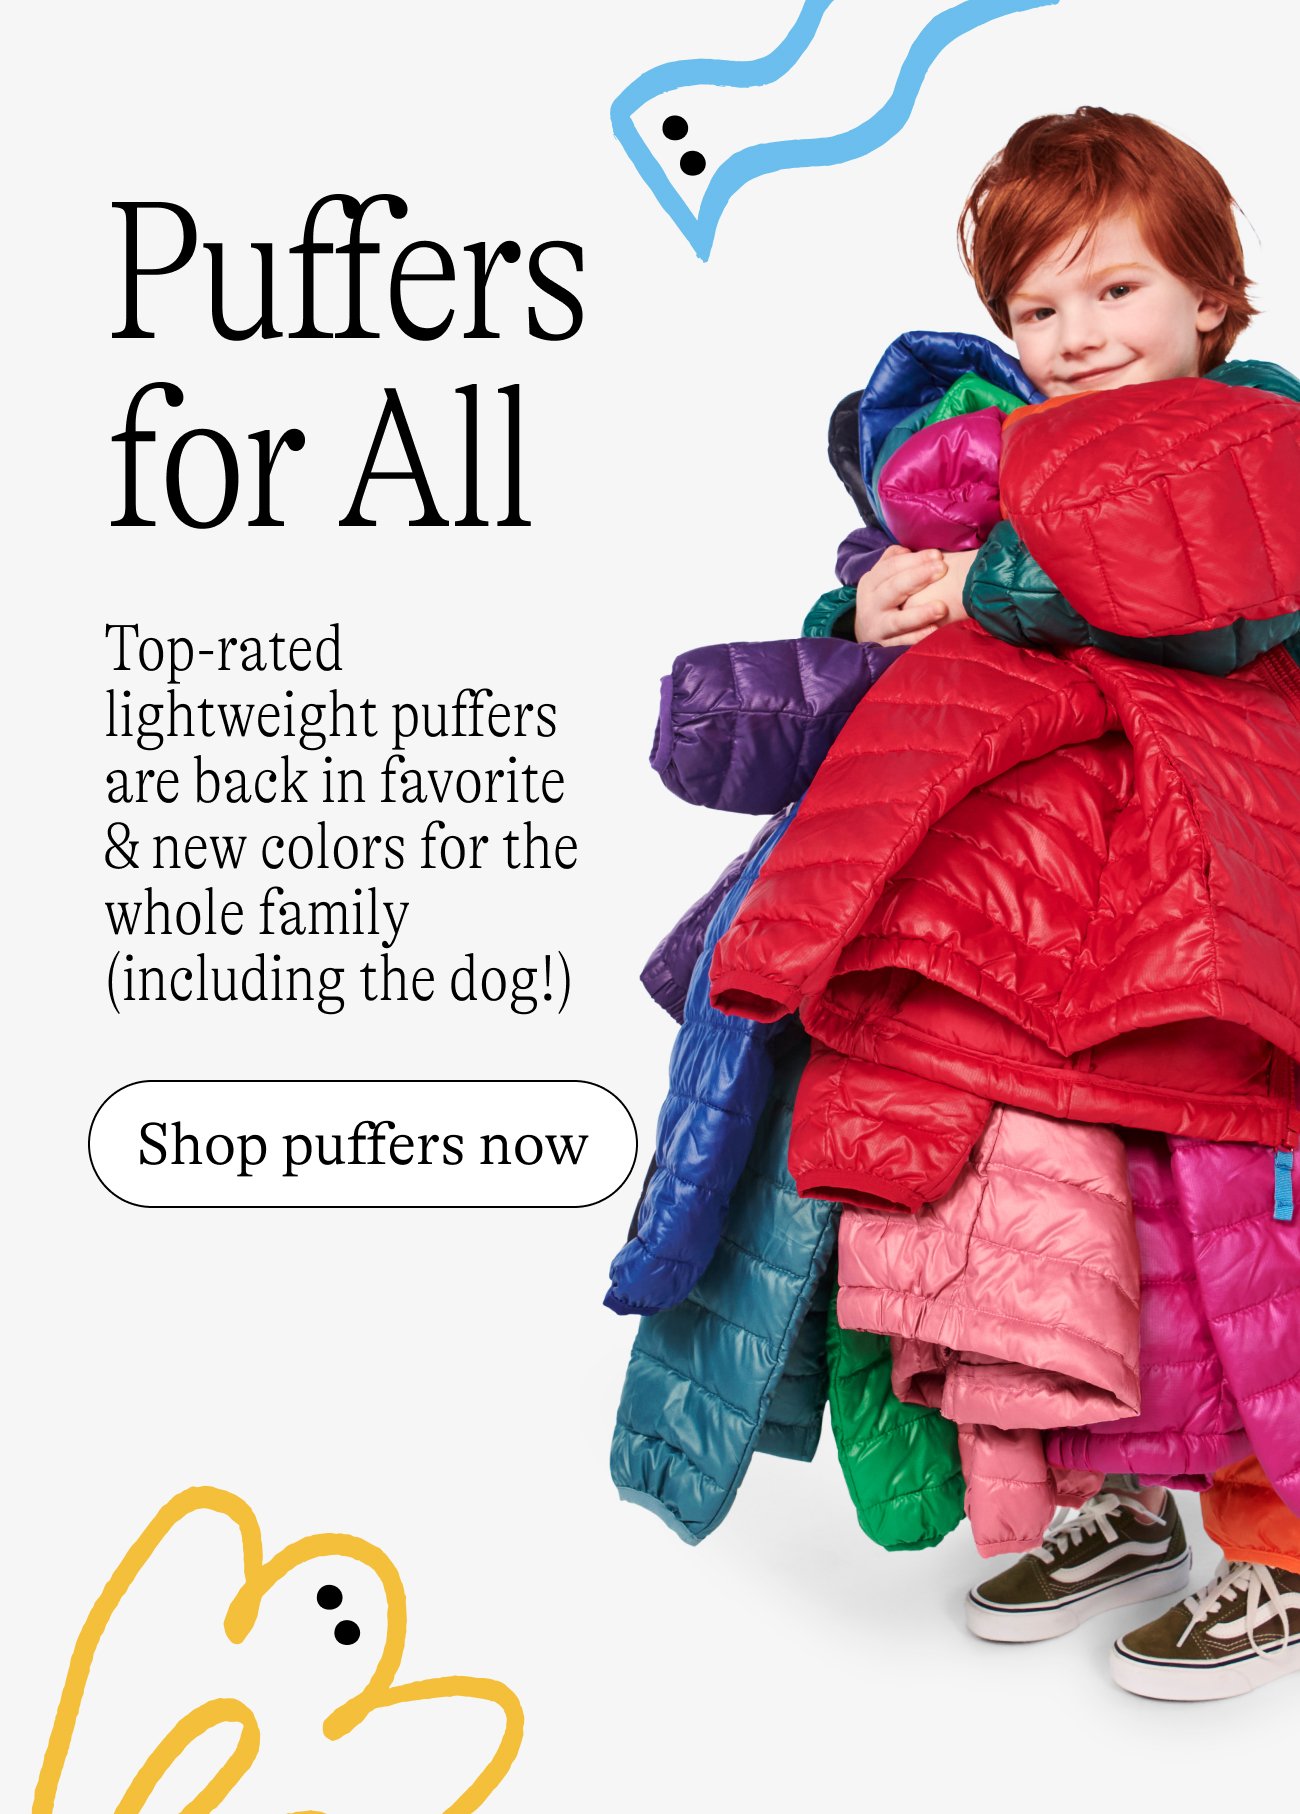 Puffers for All. Top-rated lightweight puffers are back in favorite & new colors for the whole family (including the dog!) Shop puffers now.